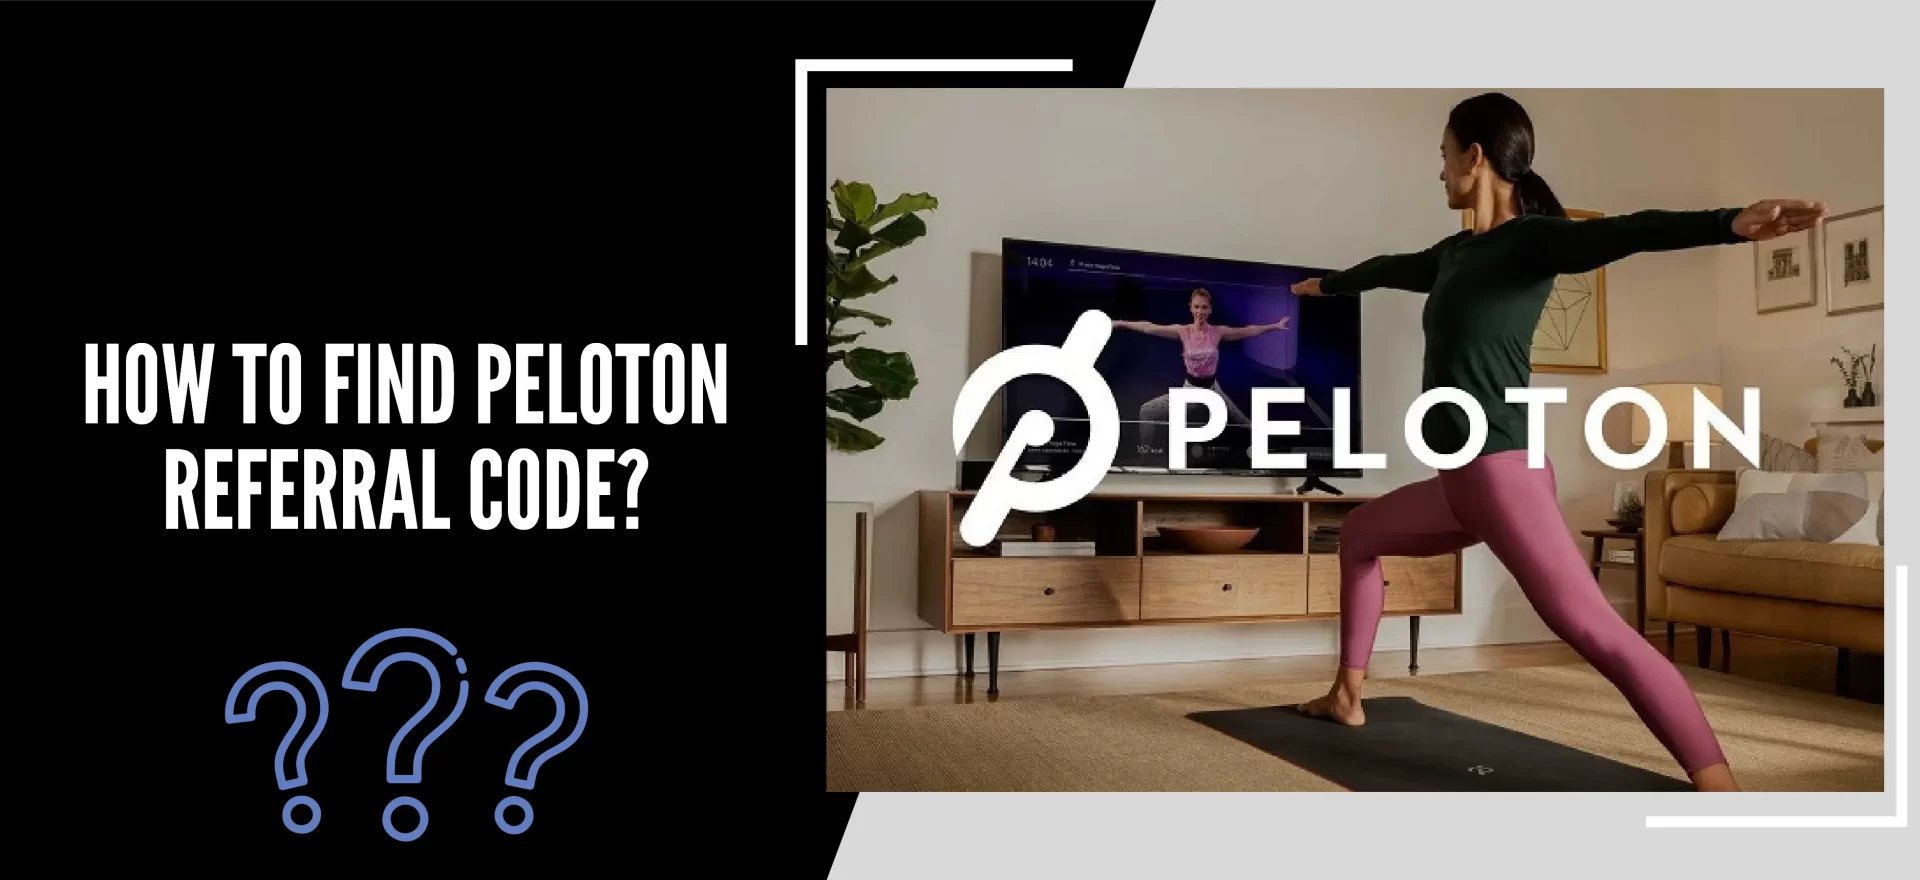 How To Find Peloton Referral Code?